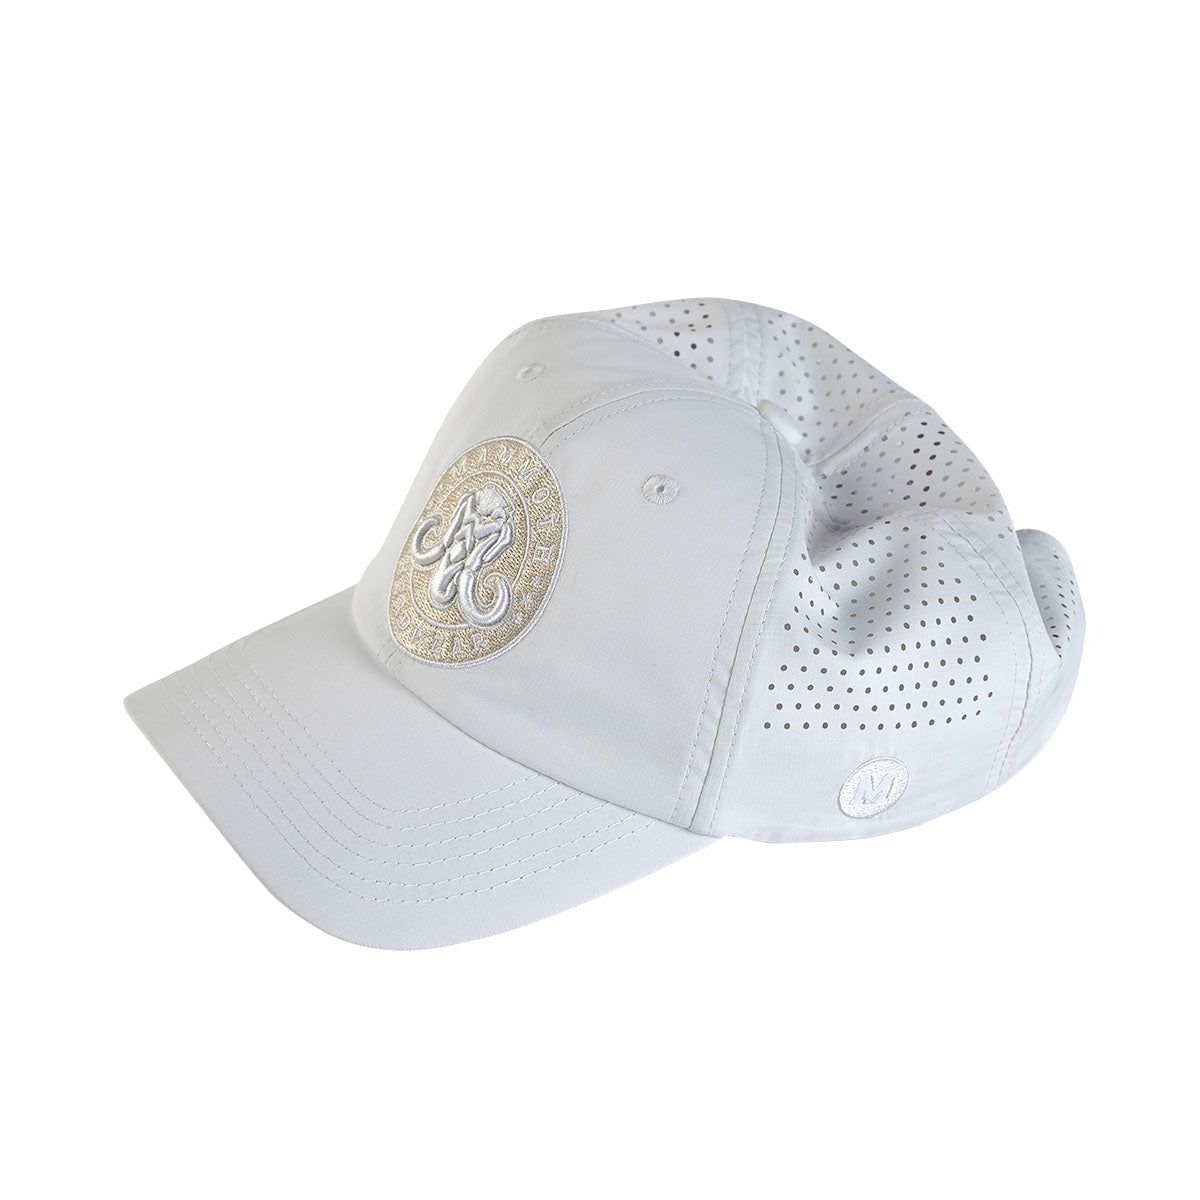 Mammoth - Performance Its White Snapback Classic Finest - Headwear at